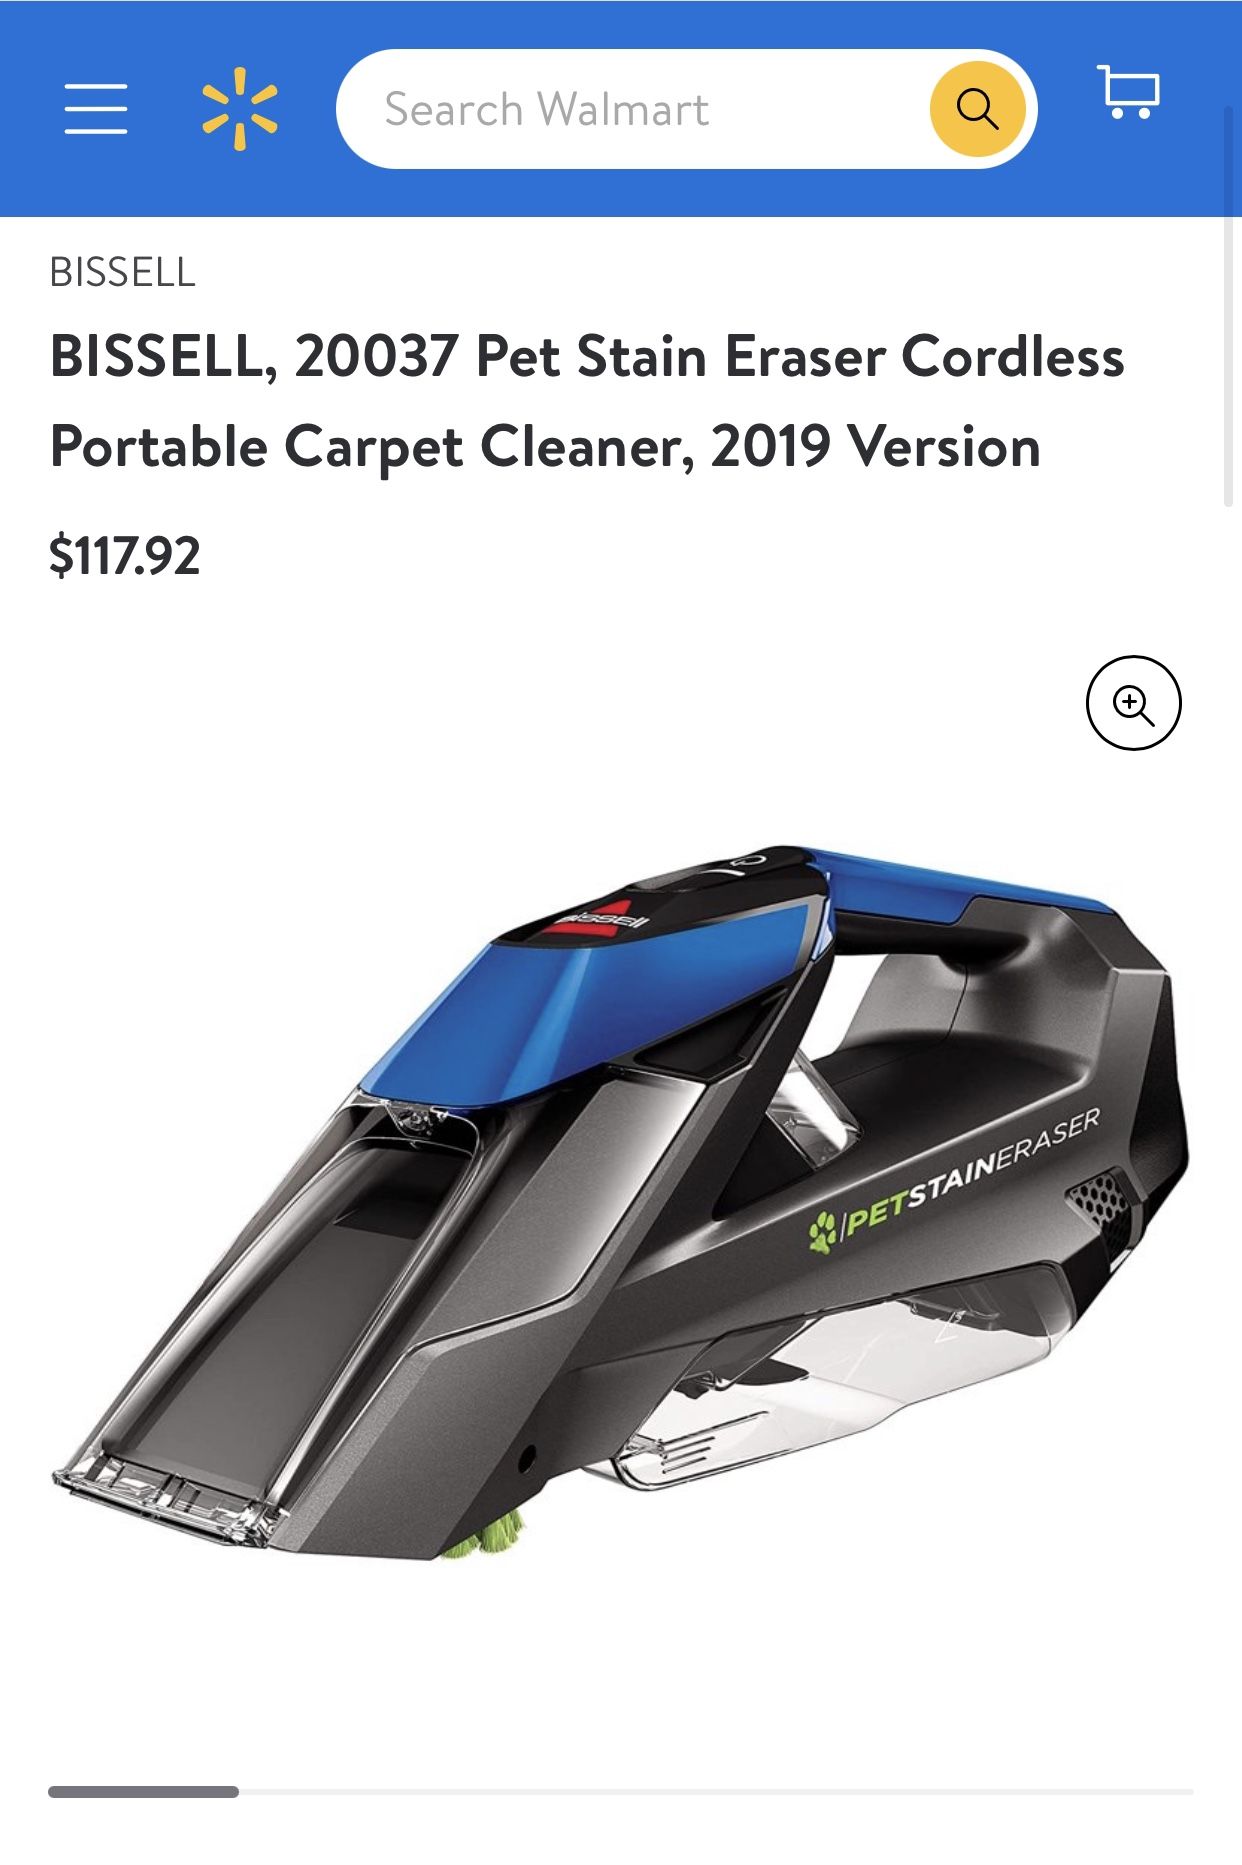 BISSELL 20037 Pet Stain Eraser Cordless Portable Carpet Cleaner